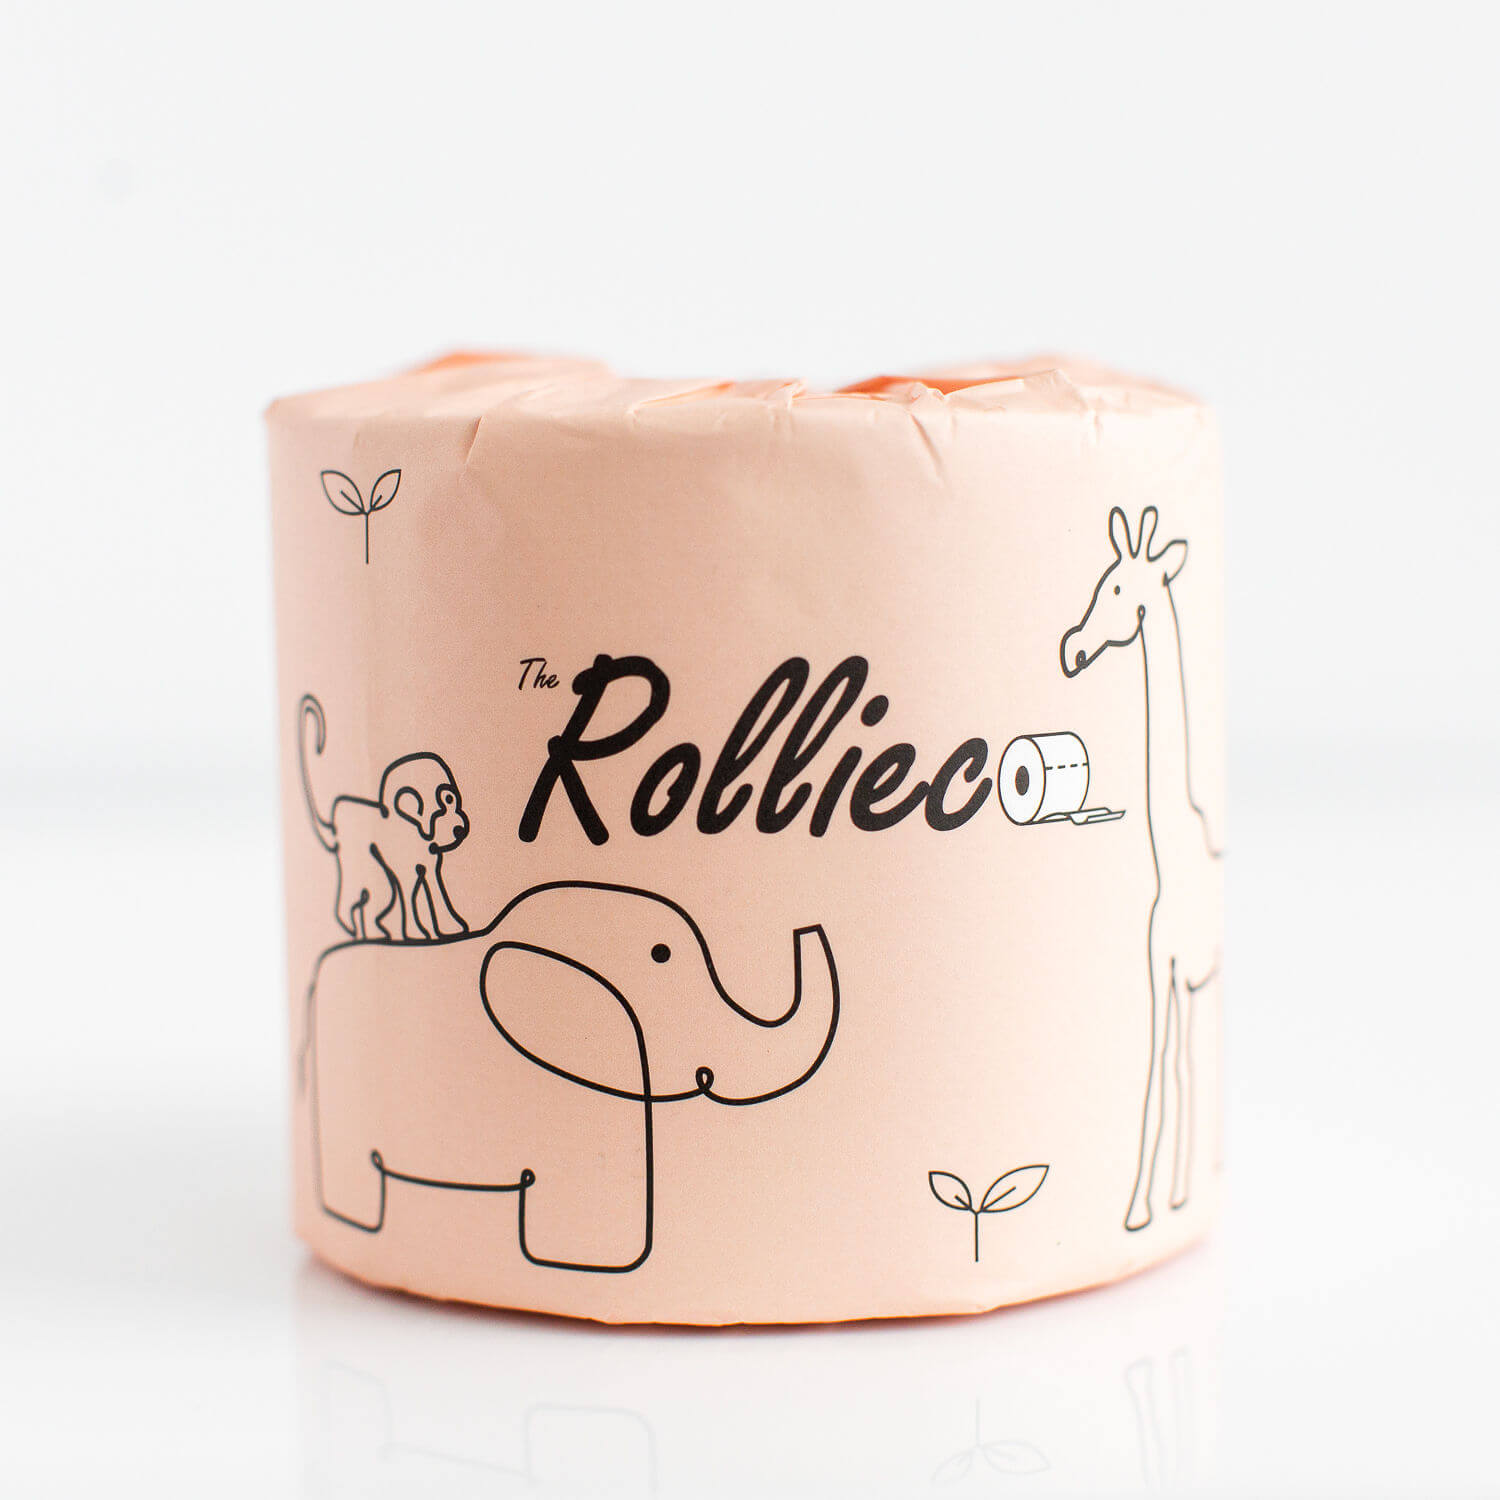 a roll of individually paper wrapped eco toilet paper branded The Rollieco. Wrapper is in pink and has cute animal design